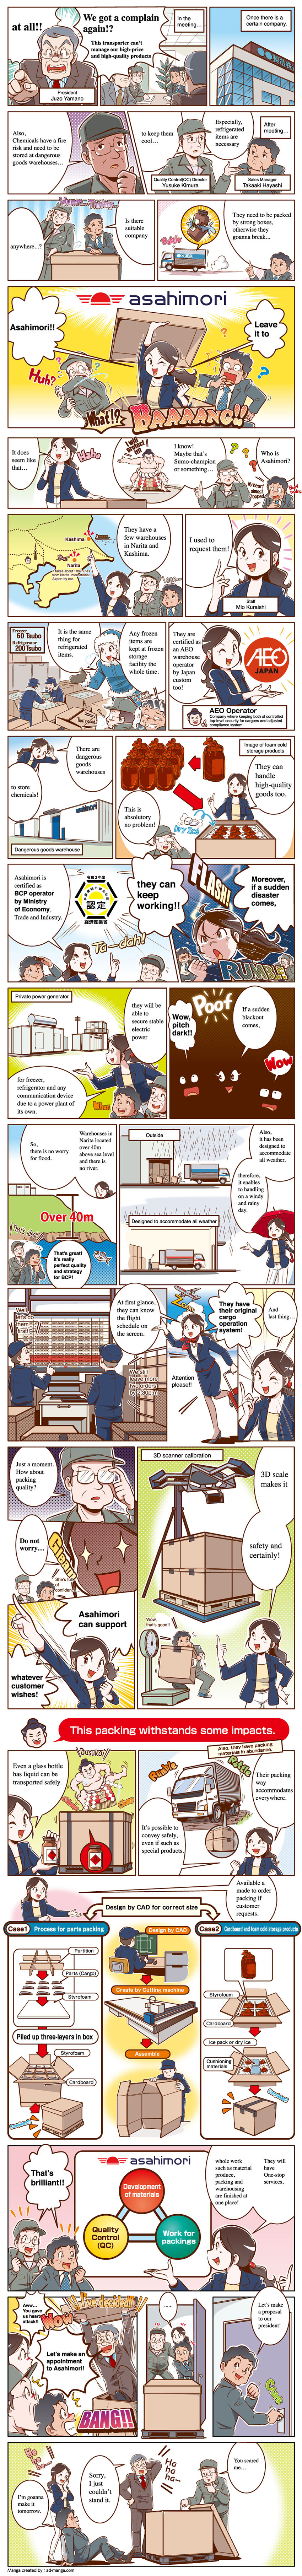 Introduce Our Business by Comic